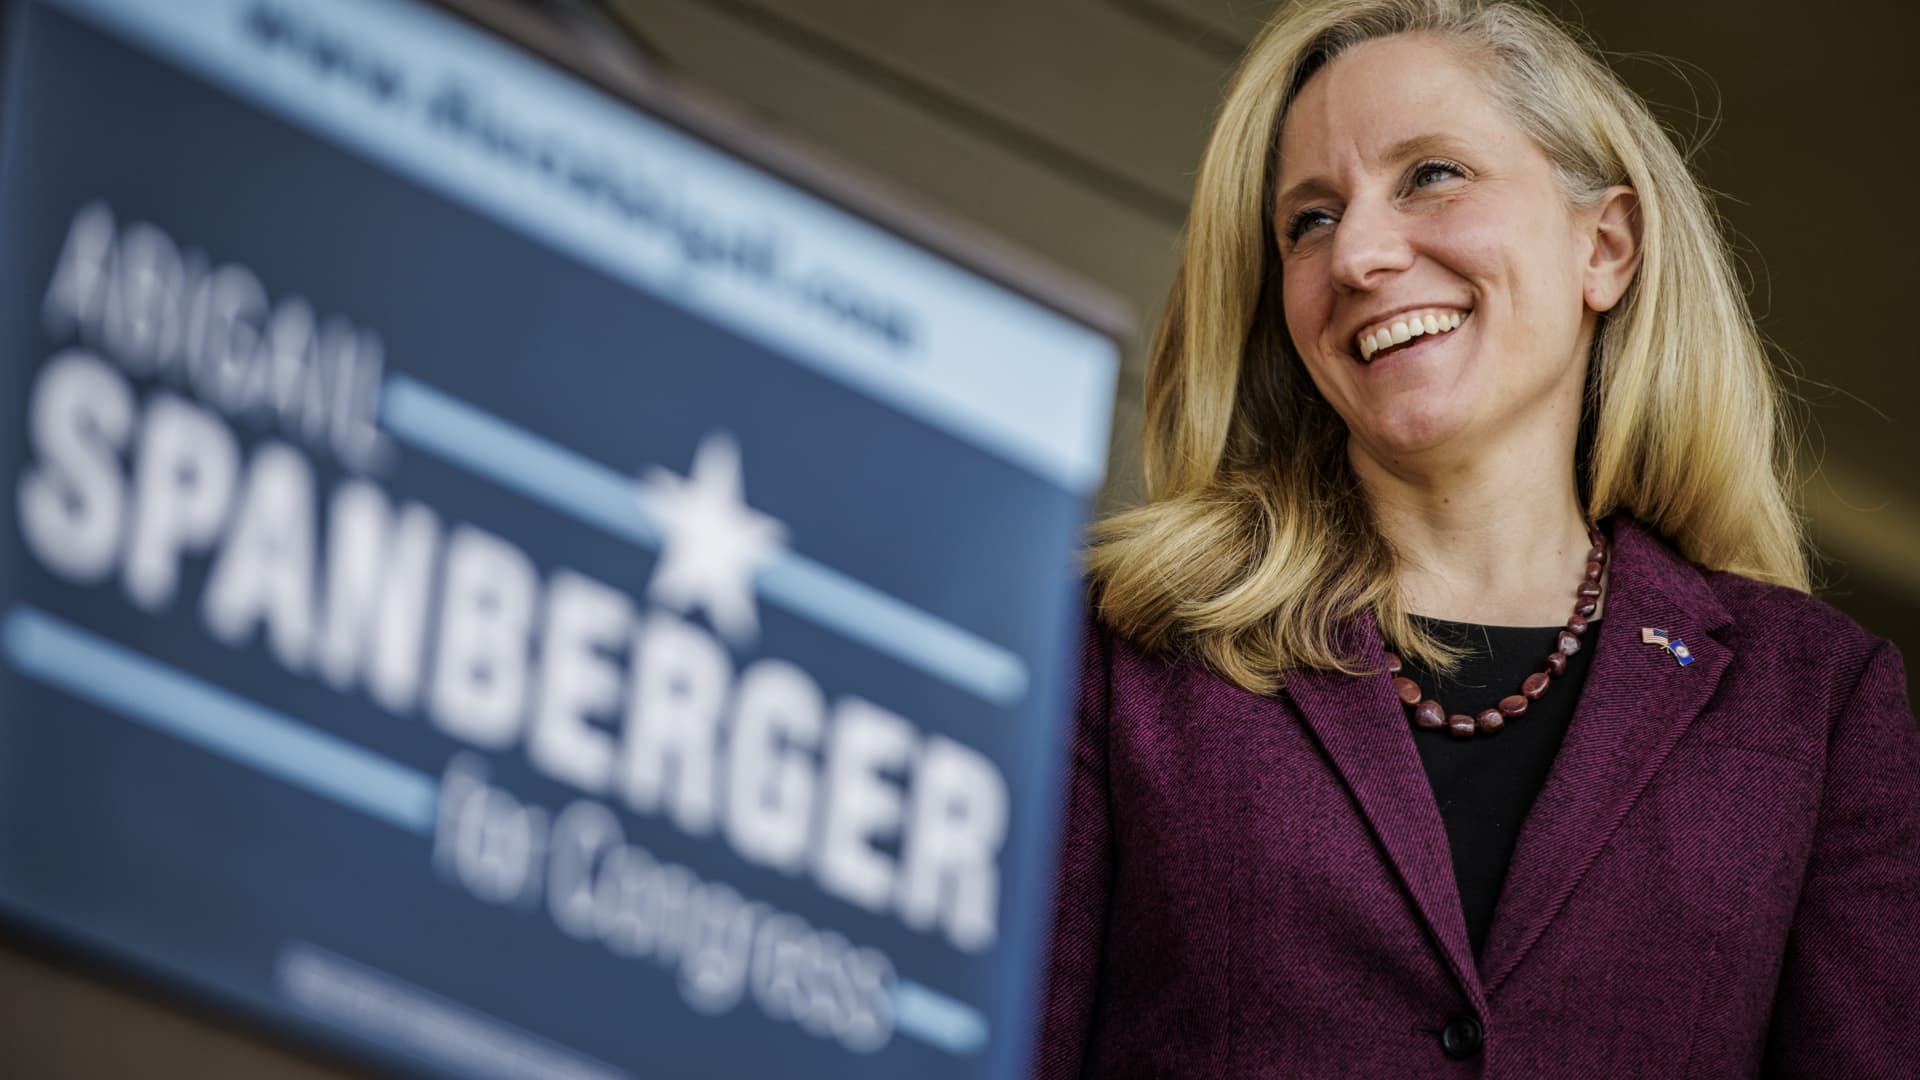 Democrat Abigail Spanberger wins reelection in bellwether Virginia district, NBC..